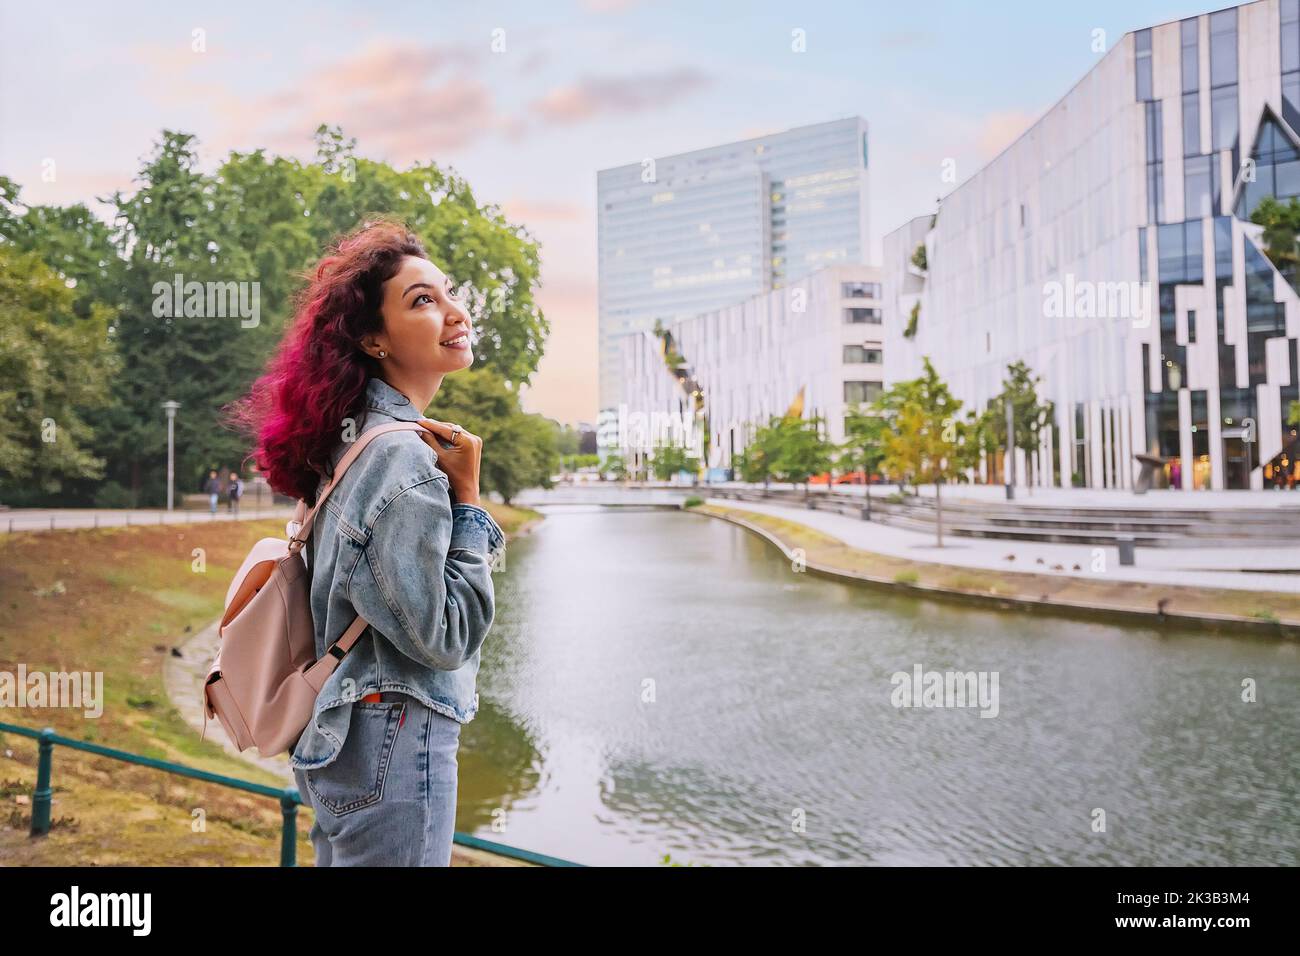 Happy tourist woman with backpack visiting Konigsallee water channel and admiring great modern architecture buildings in Dusseldorf, Germany Stock Photo